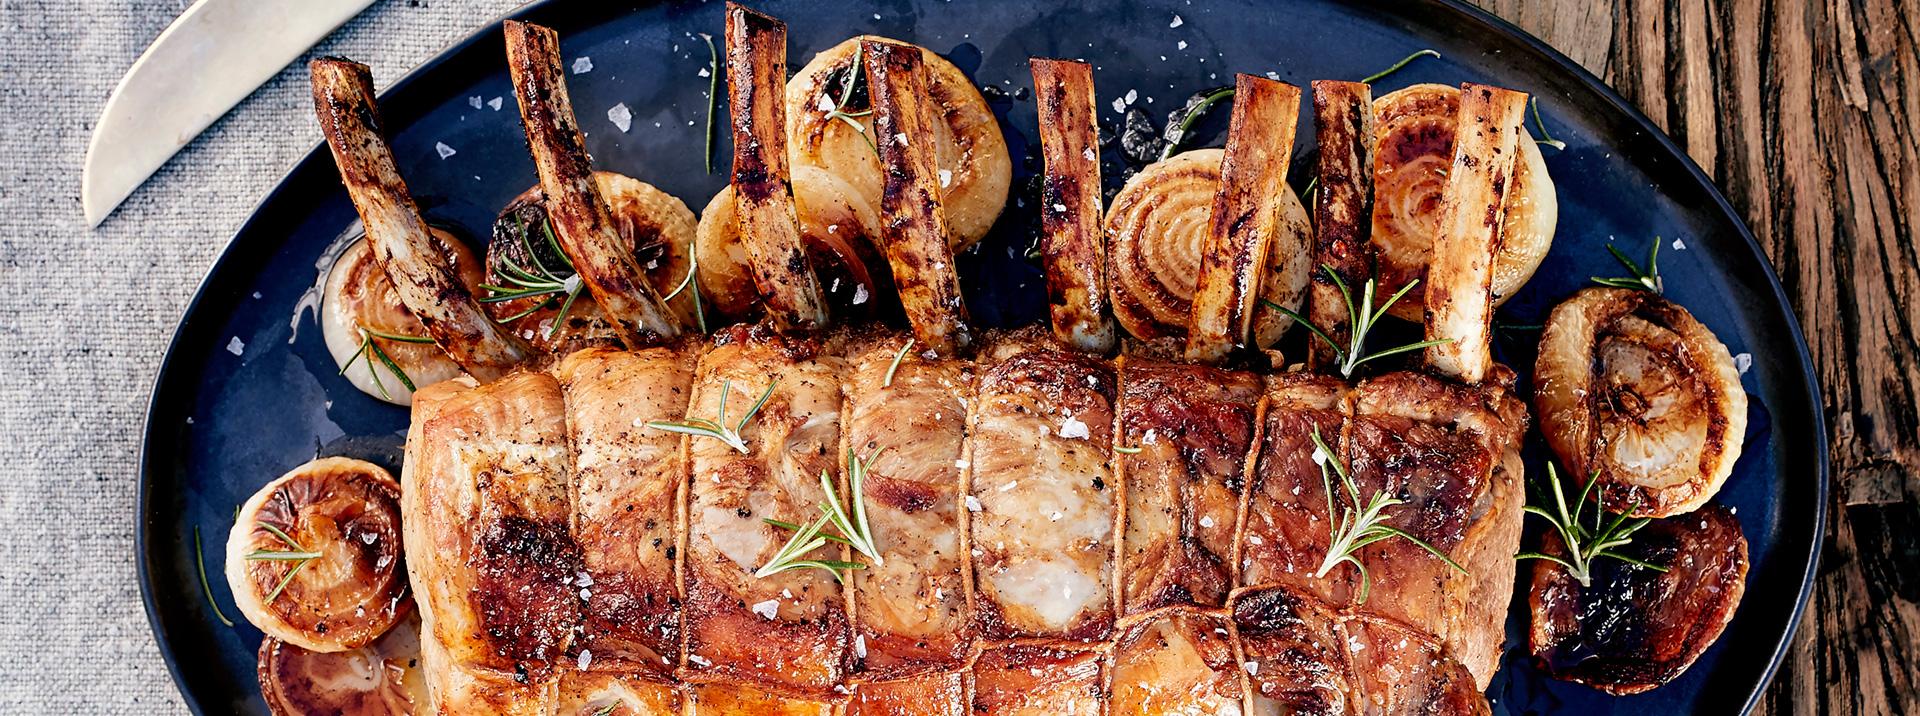 roasted pork on serving dish small